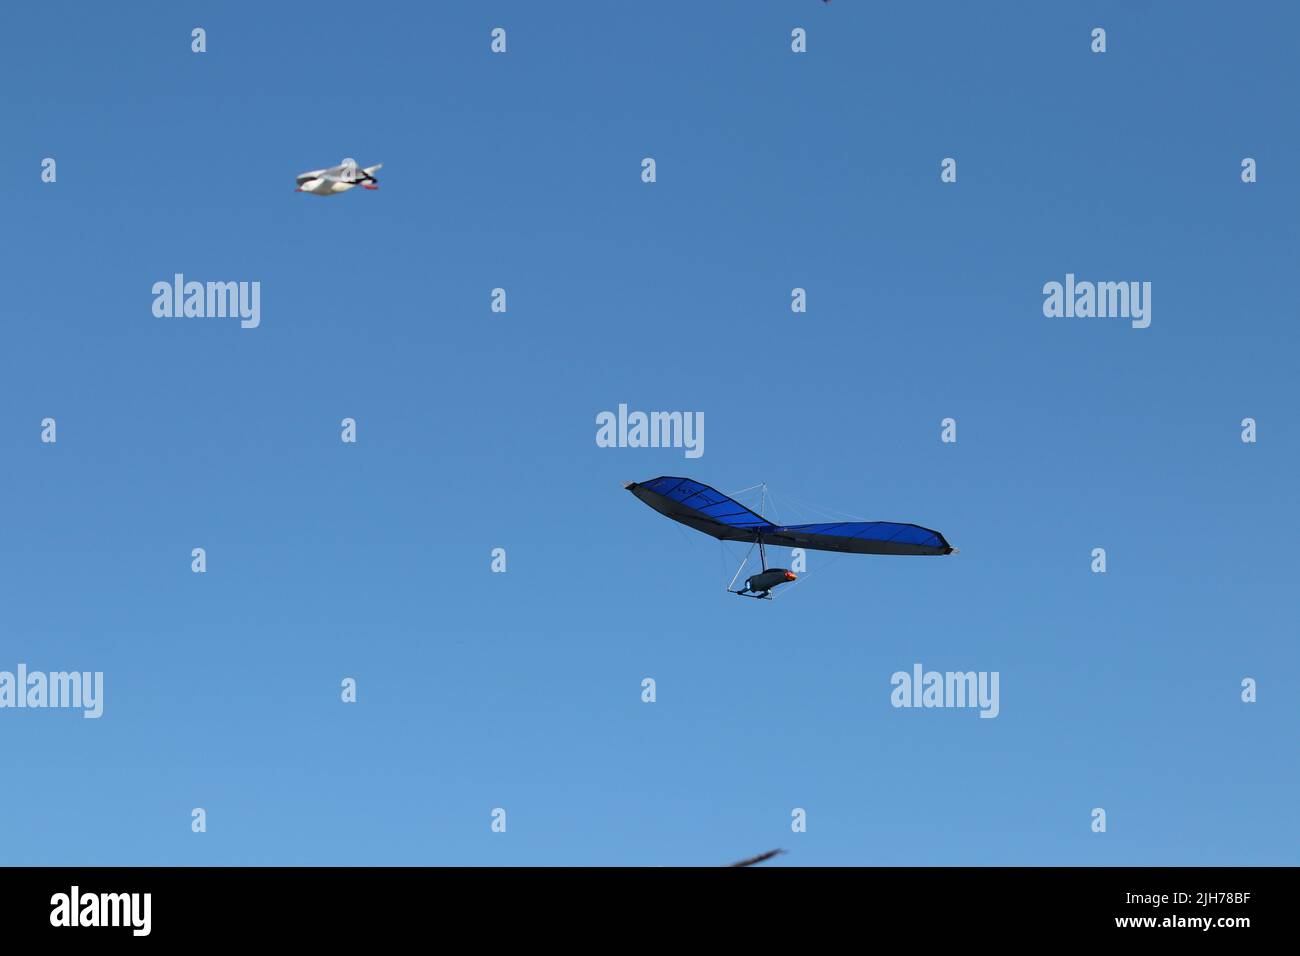 Hang glider in flight with seagulls Stock Photo